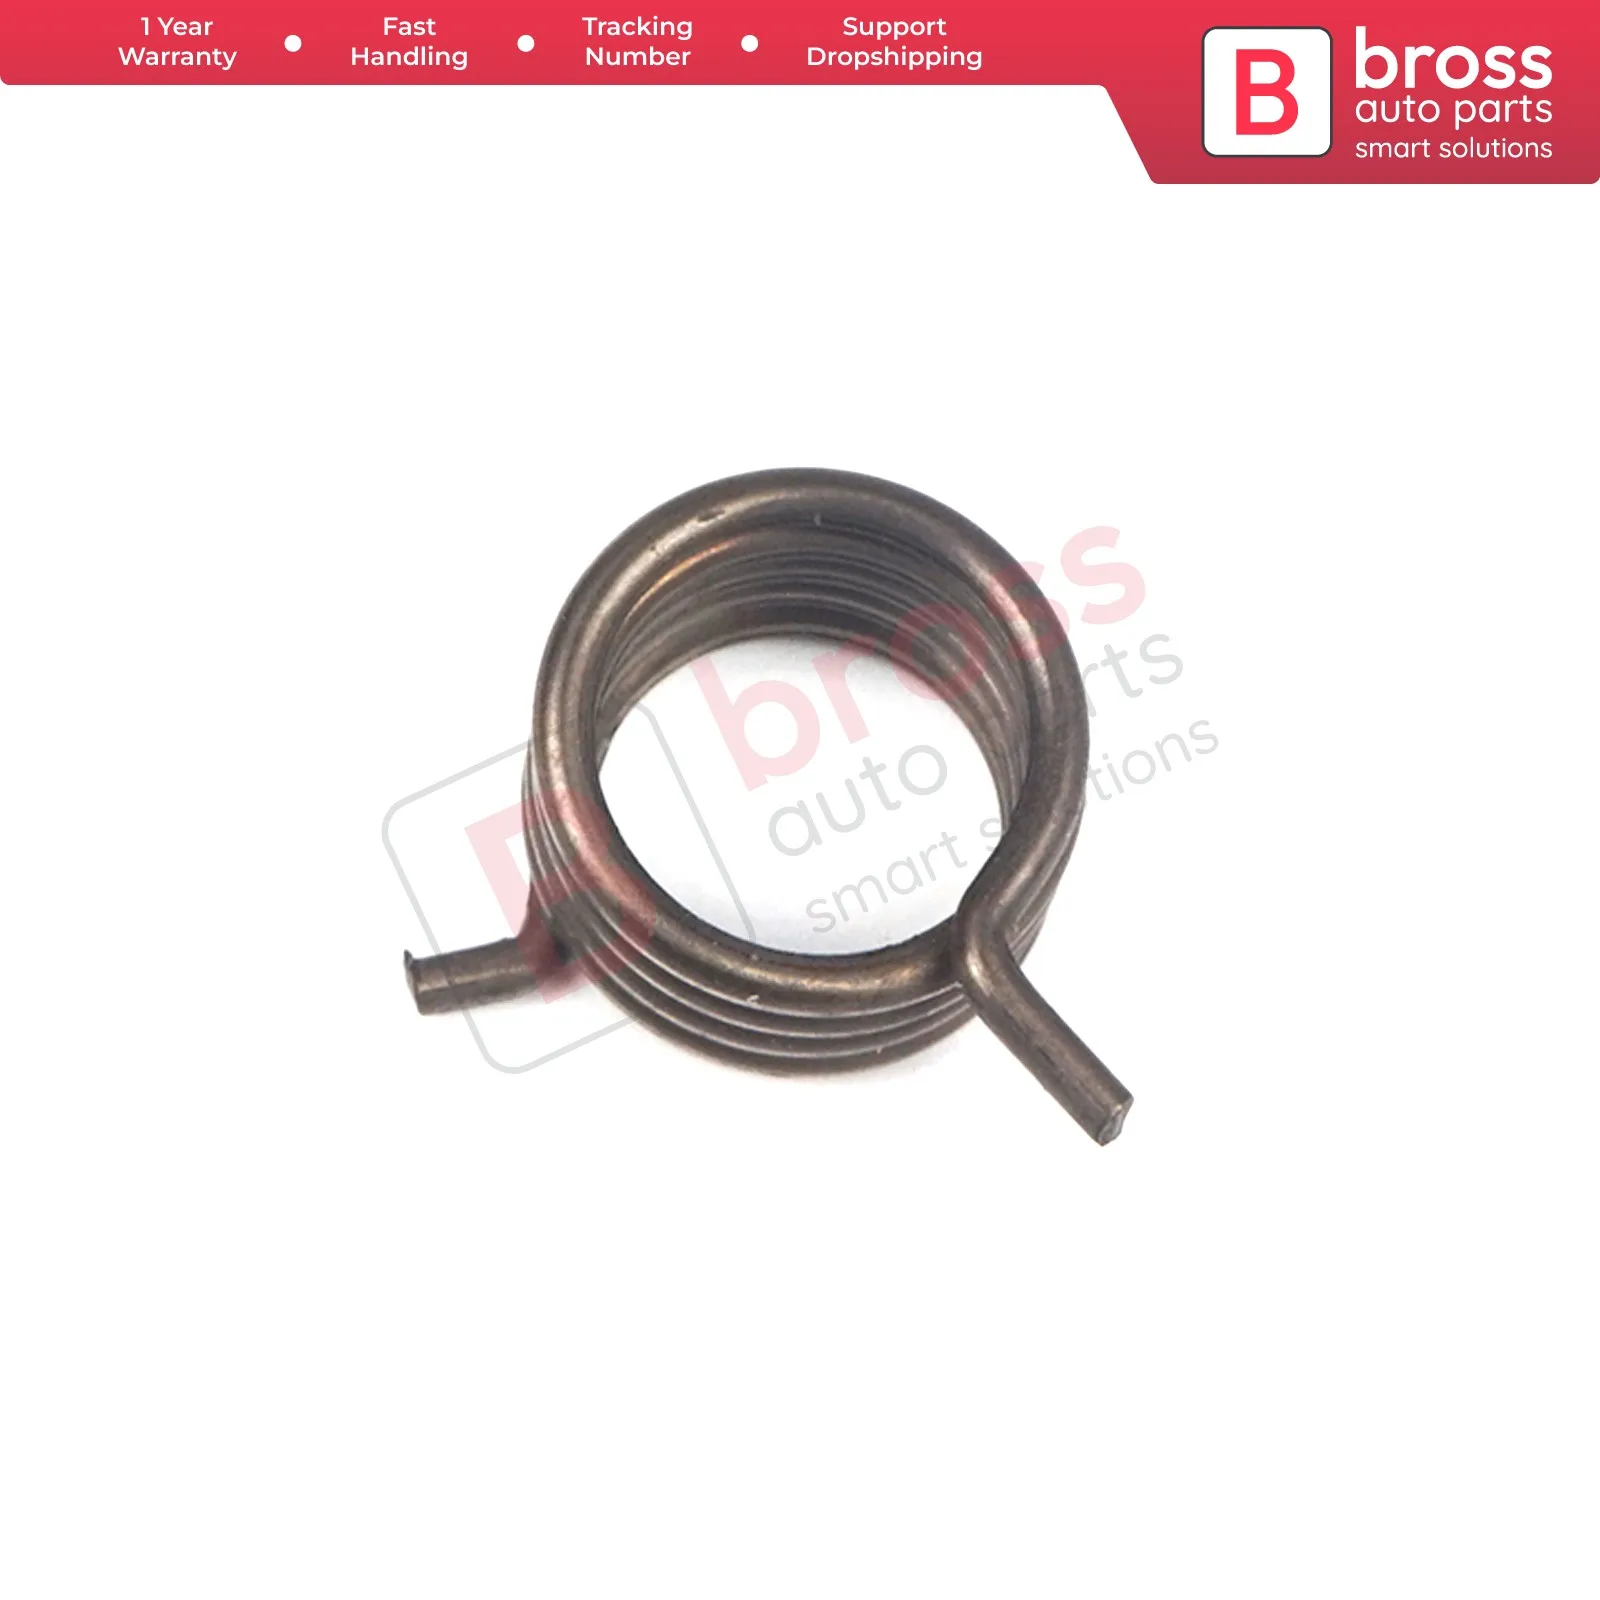 

Bross Auto Parts BDP921 Ignition Switch Barrel Key Lock Cylinder Repair Spring for Fiat Ducato Fast Shipment Ship From Turkey